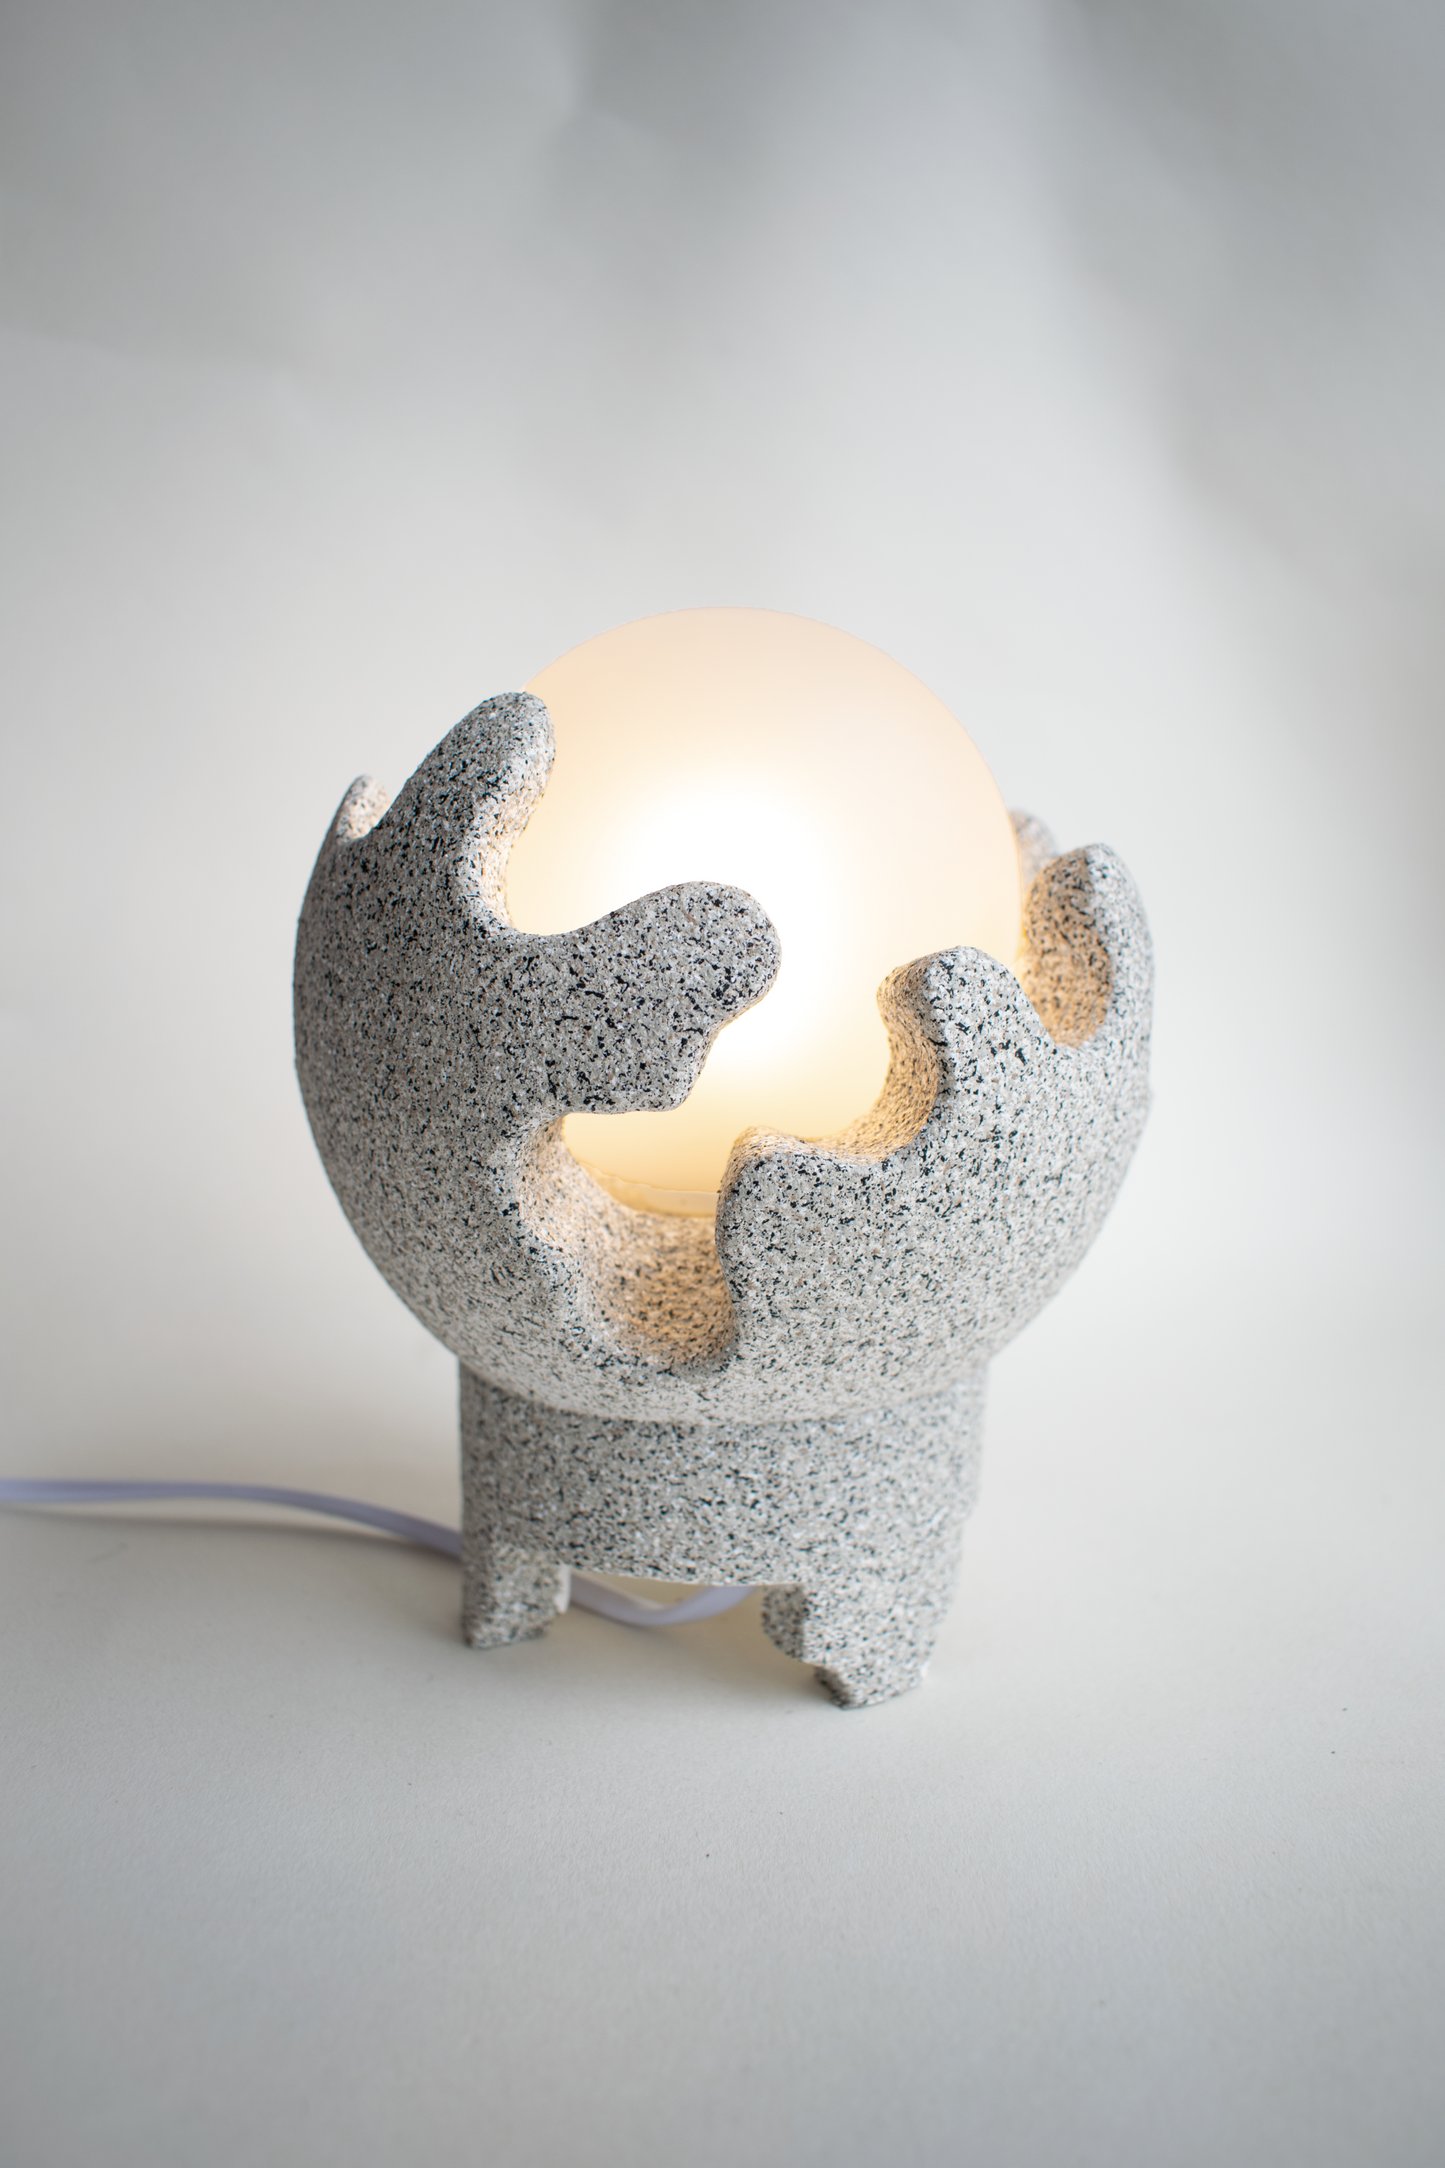 Grey Cora - Small Modern Table Lamp with Curvy Textured Base and Round Glass Light Shade, Dimmable Bedside Desk Lamp